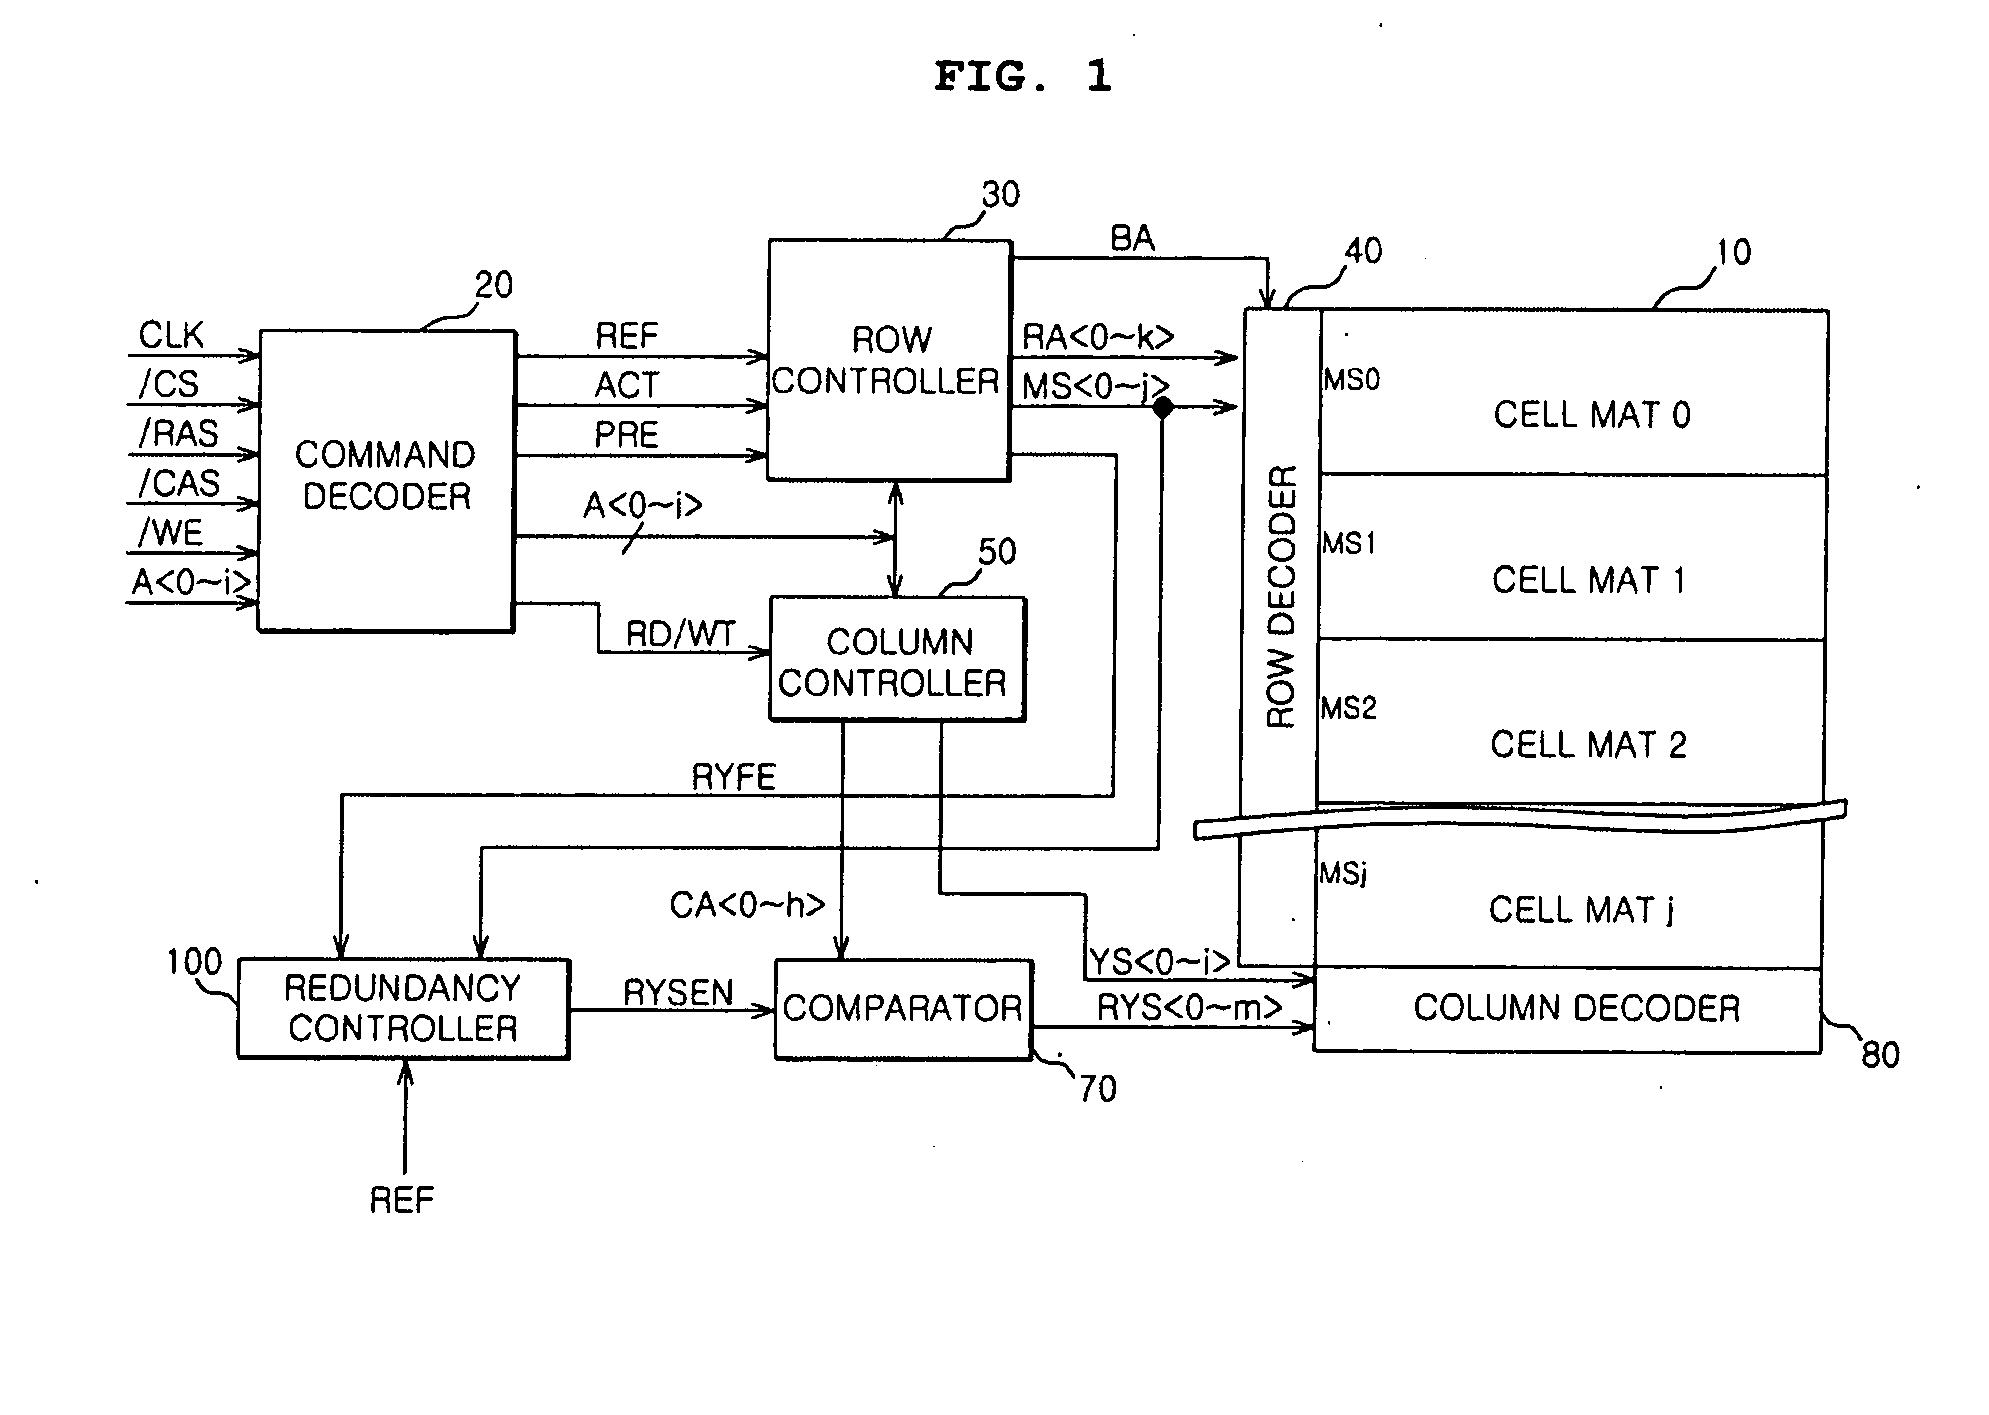 Semiconductor memory apparatus and method of controlling redundancy thereof